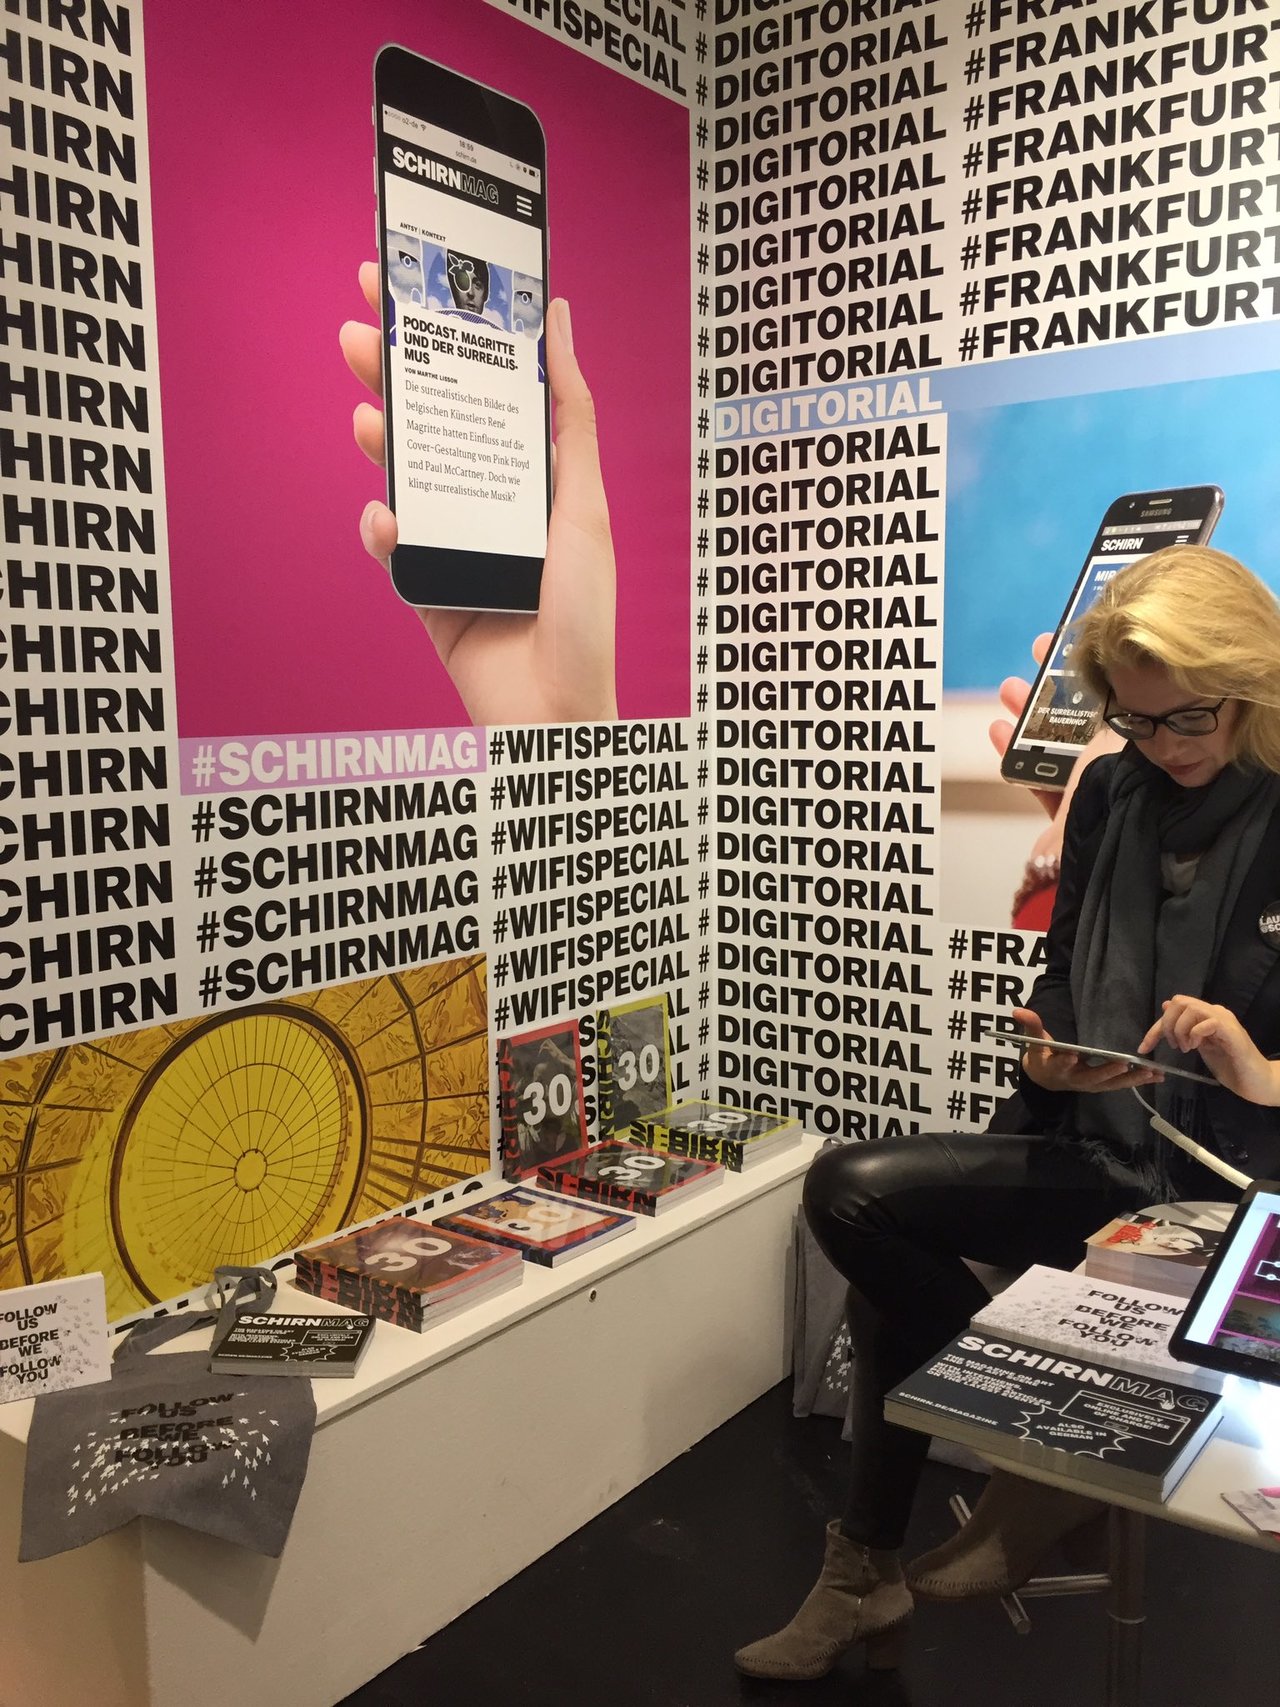 RT @SCHIRN: Good morning! Day two @THE_ARTS_PLUS @Book_Fair #fbm17 #bebold and meet us at booth 4.1. M79 https://t.co/1v7QLJBaBk